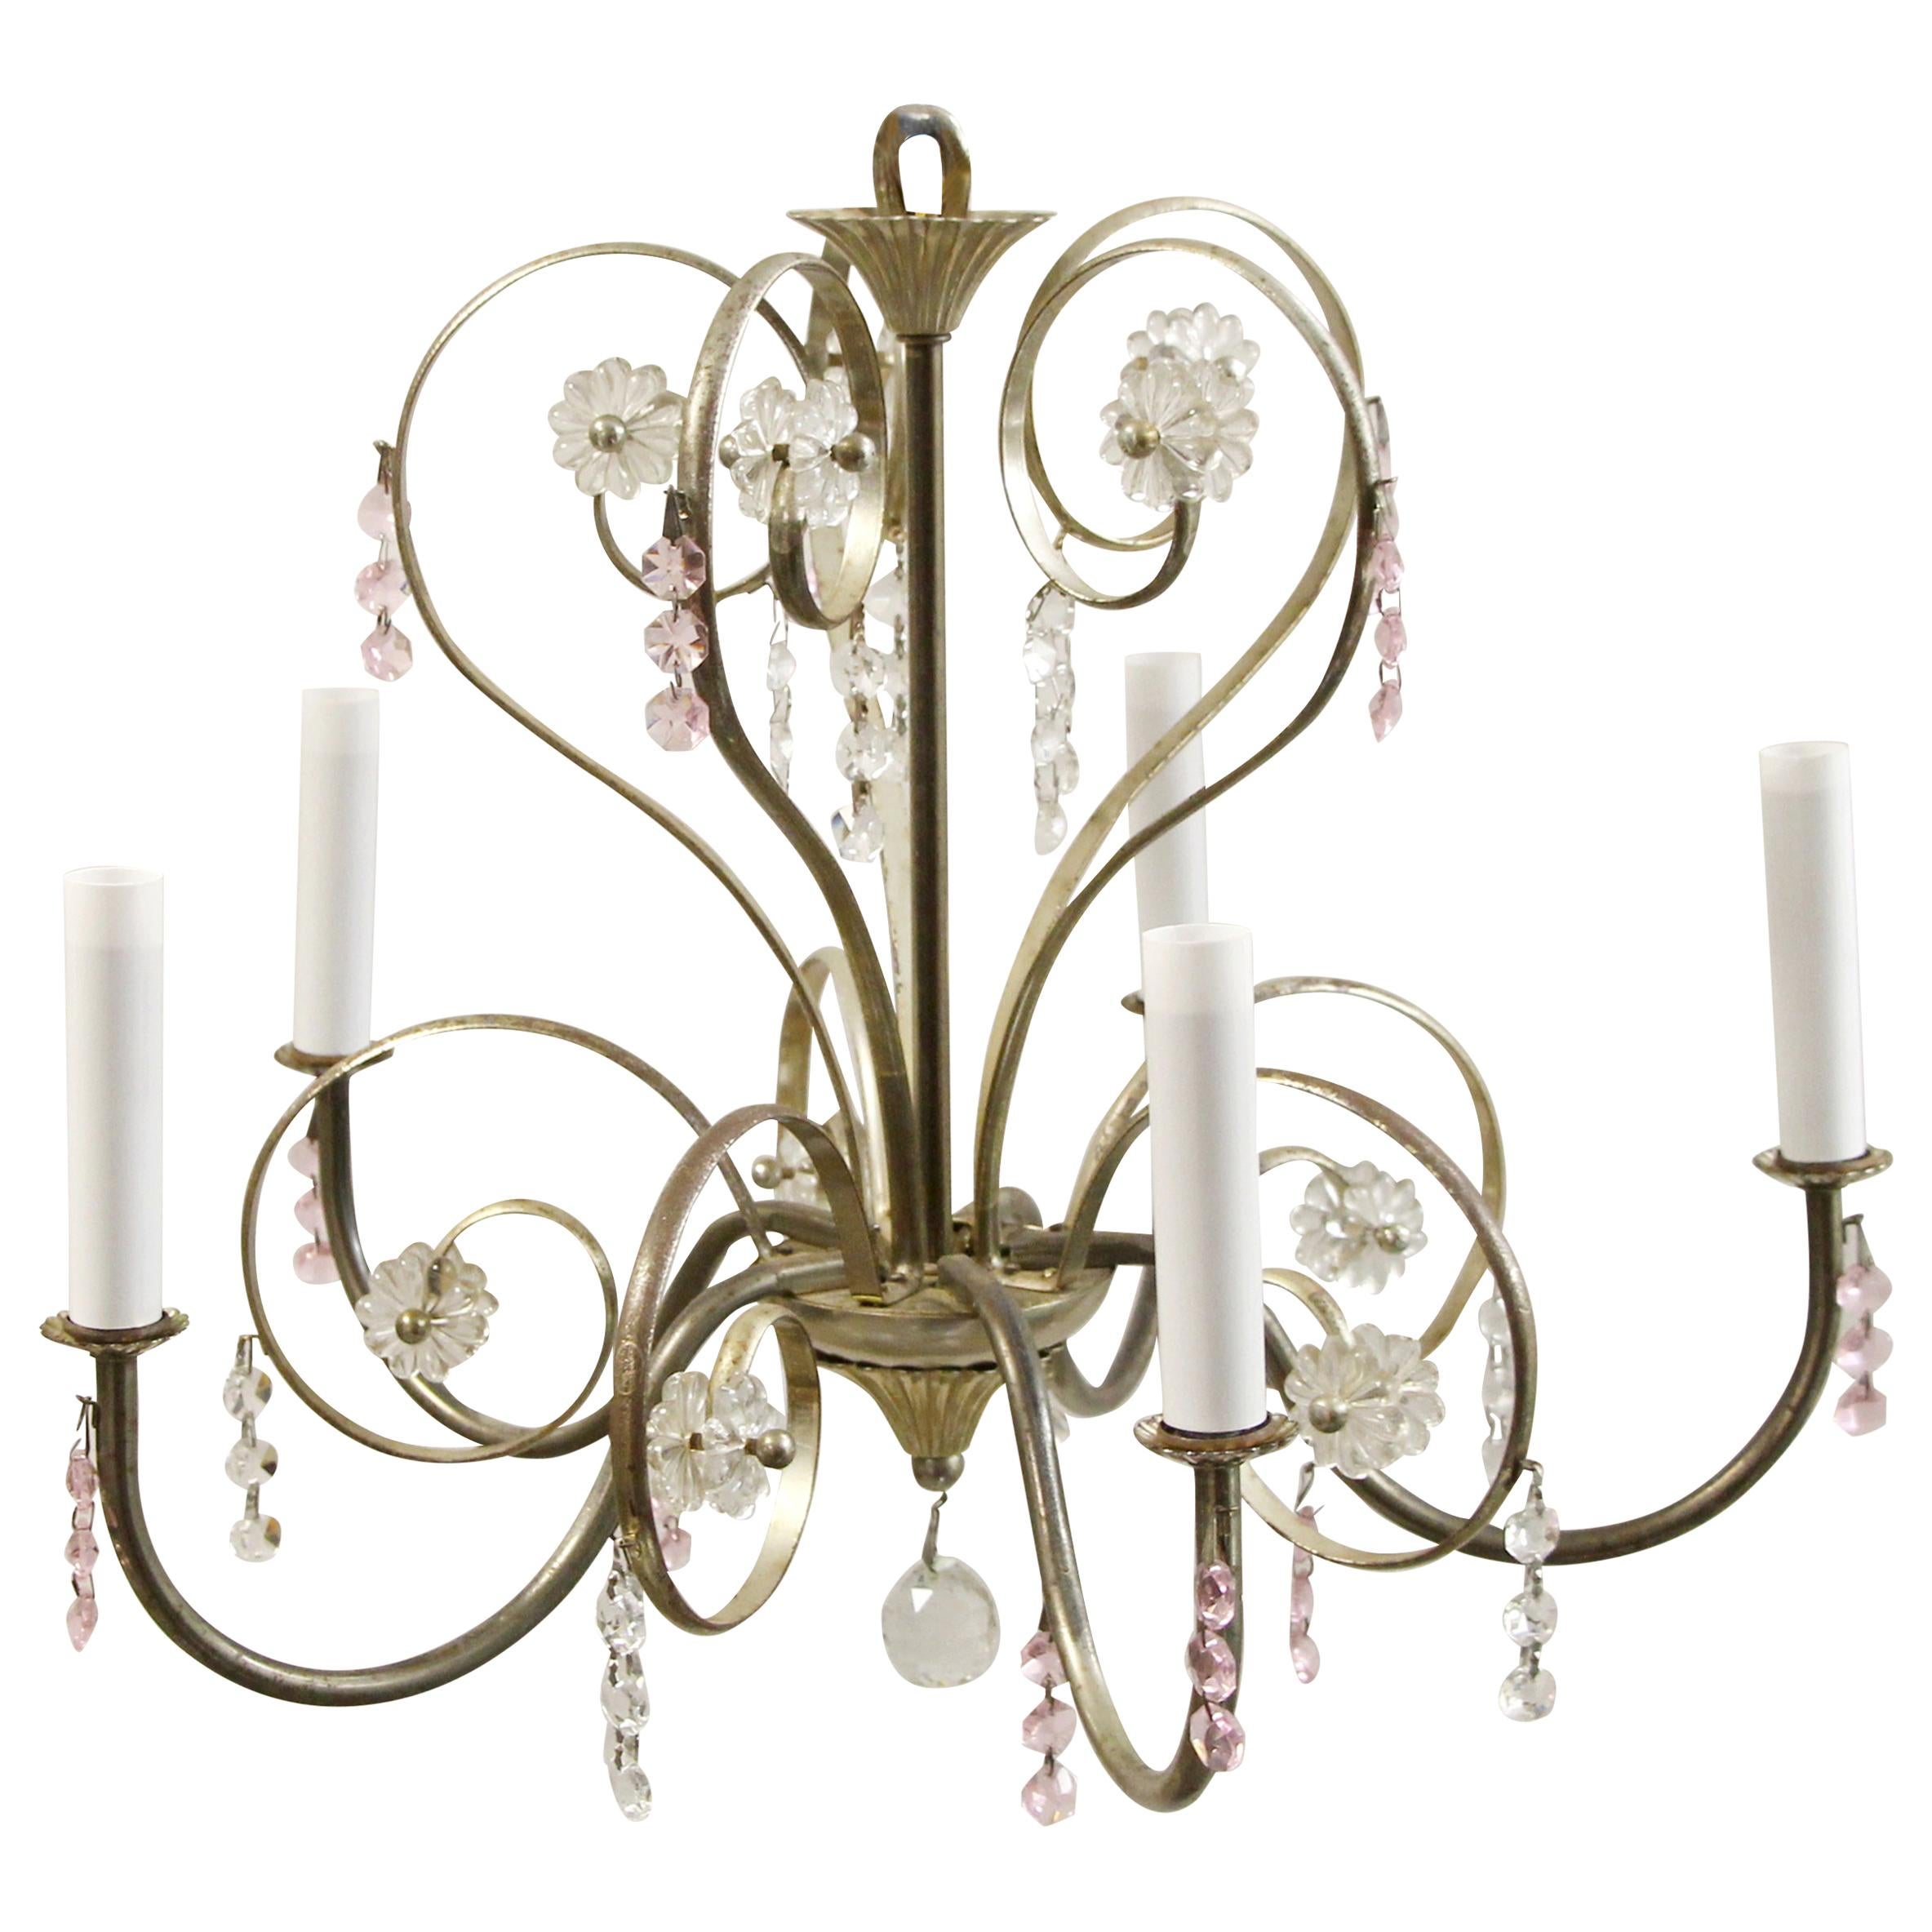 1990s 5 Arm Petite Nickel Plated Floral Style Chandelier